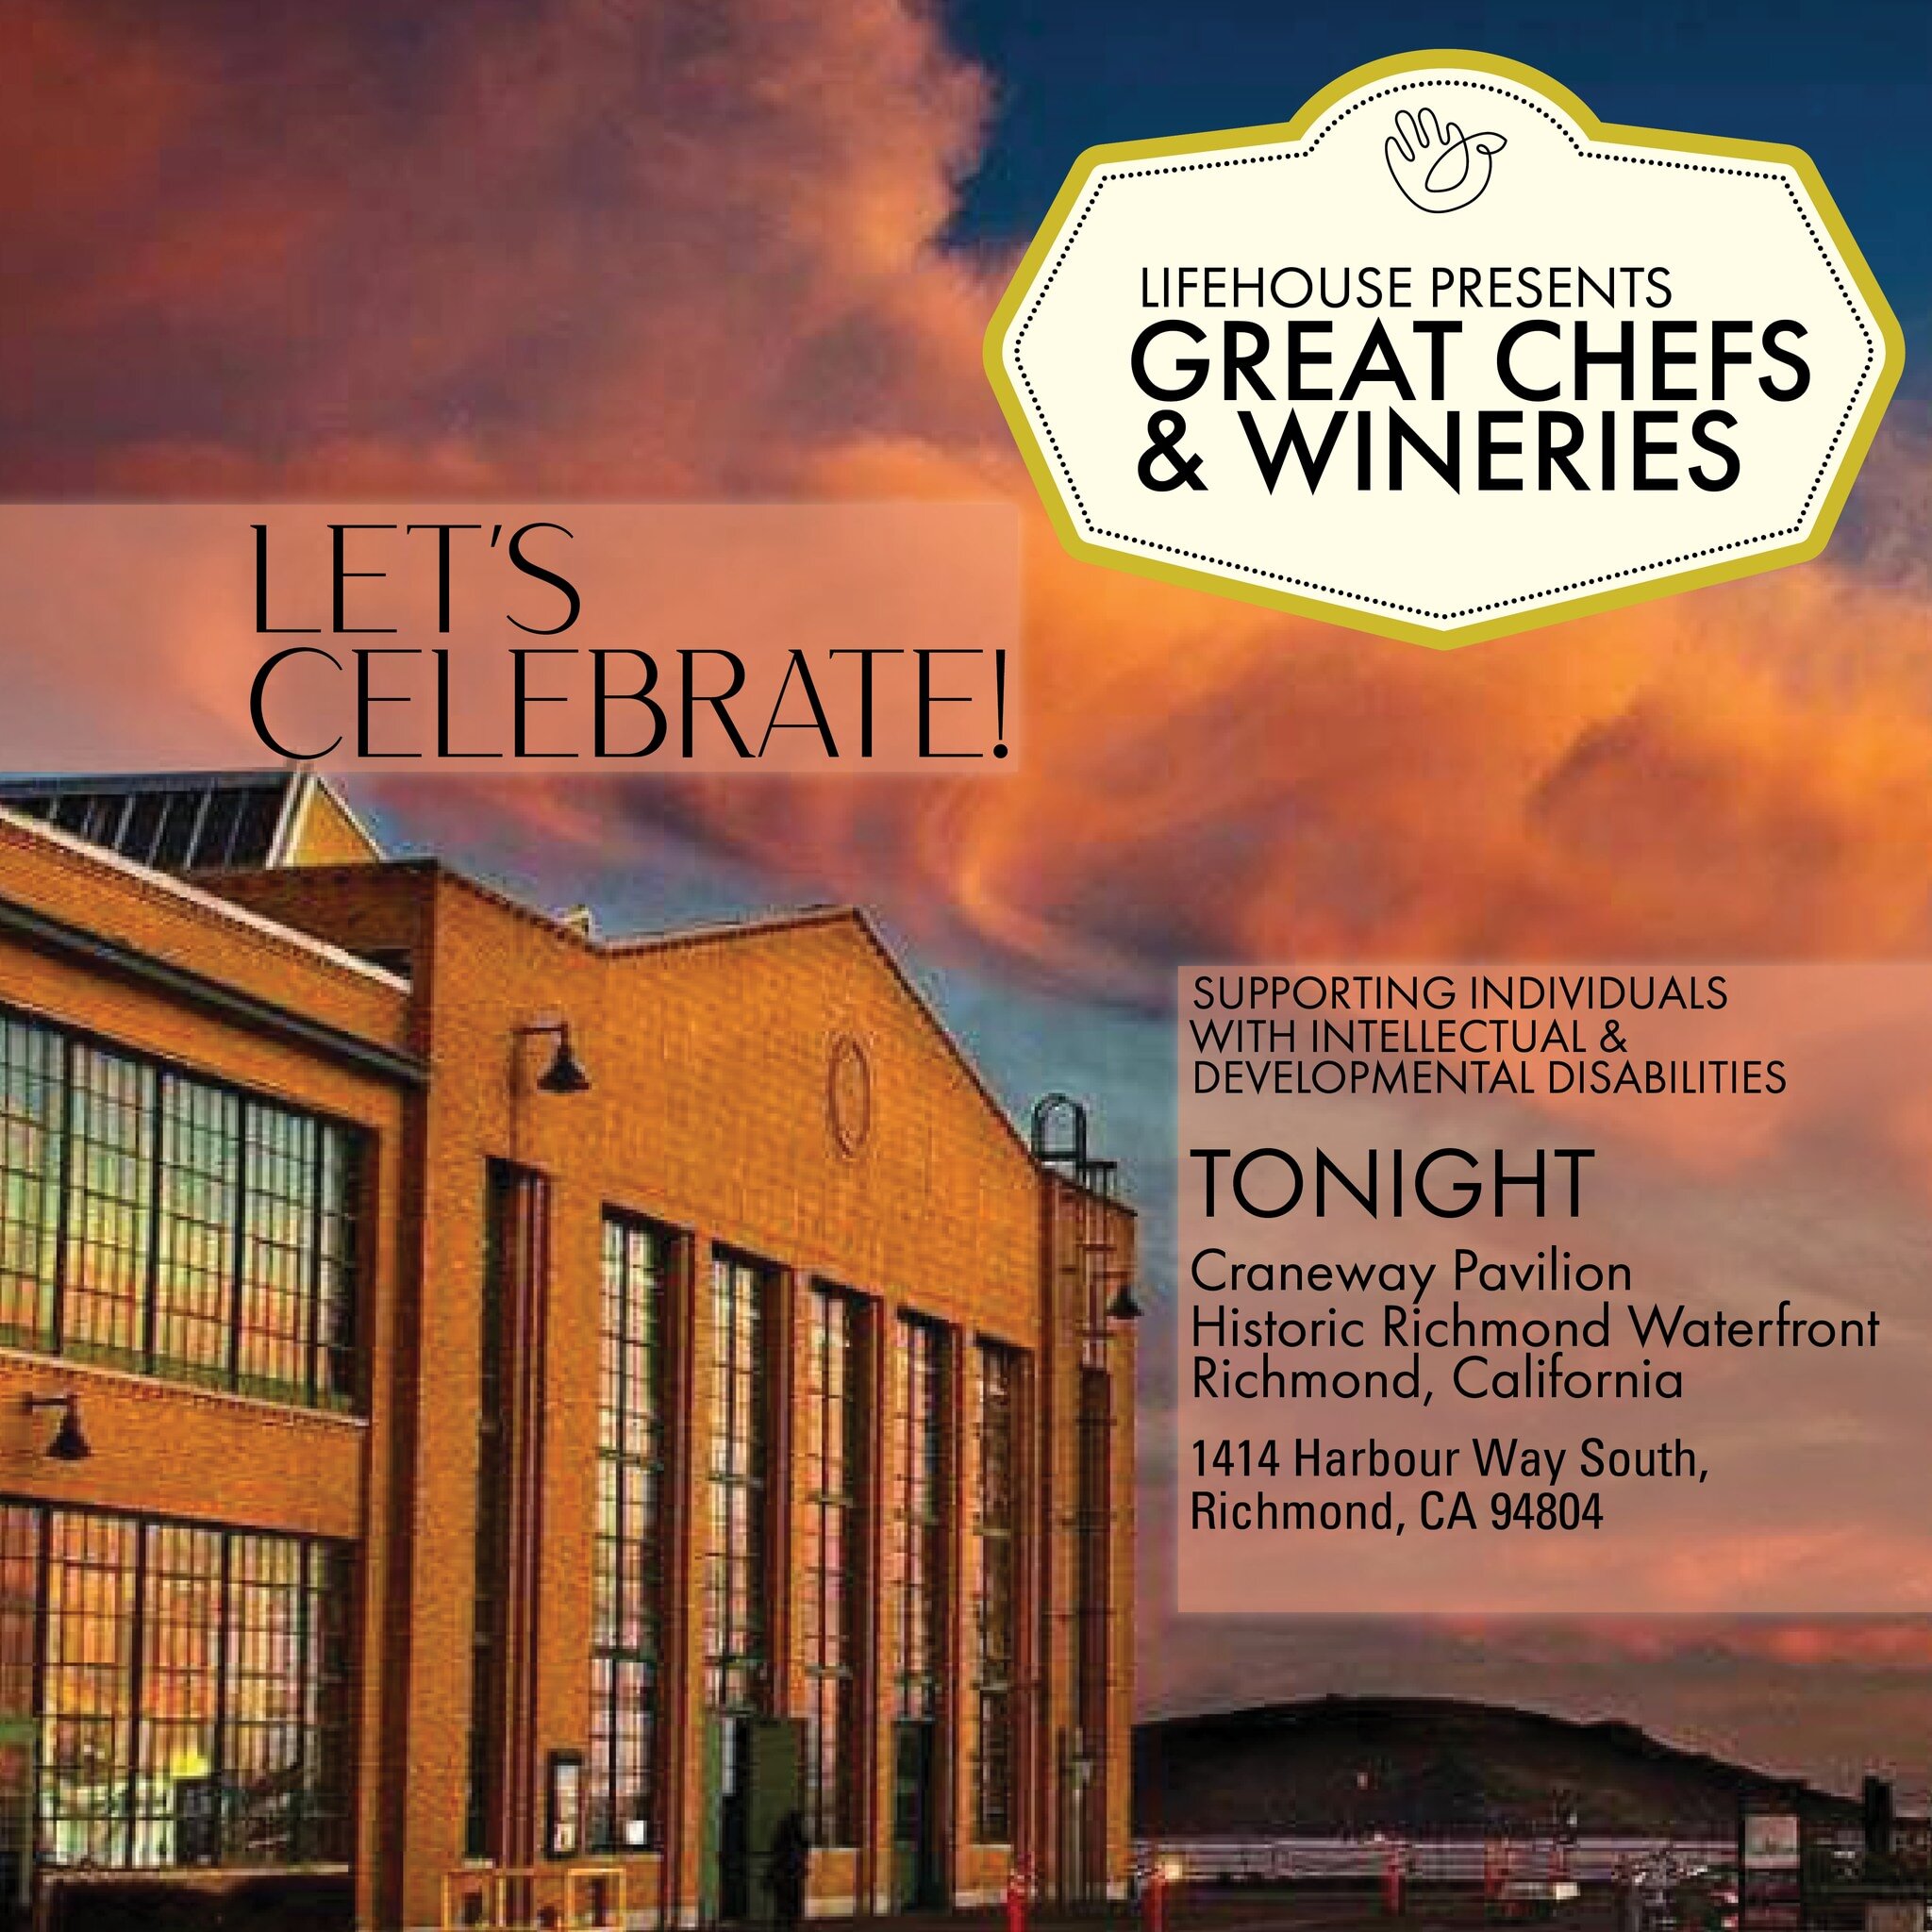 Tonight we toast to the people we support and the community that so graciously lifts us up. There will be great food, fine wine, and world-class entertainment as we raise funds to make certain that Lifehouse is able to continue its vital mission and 